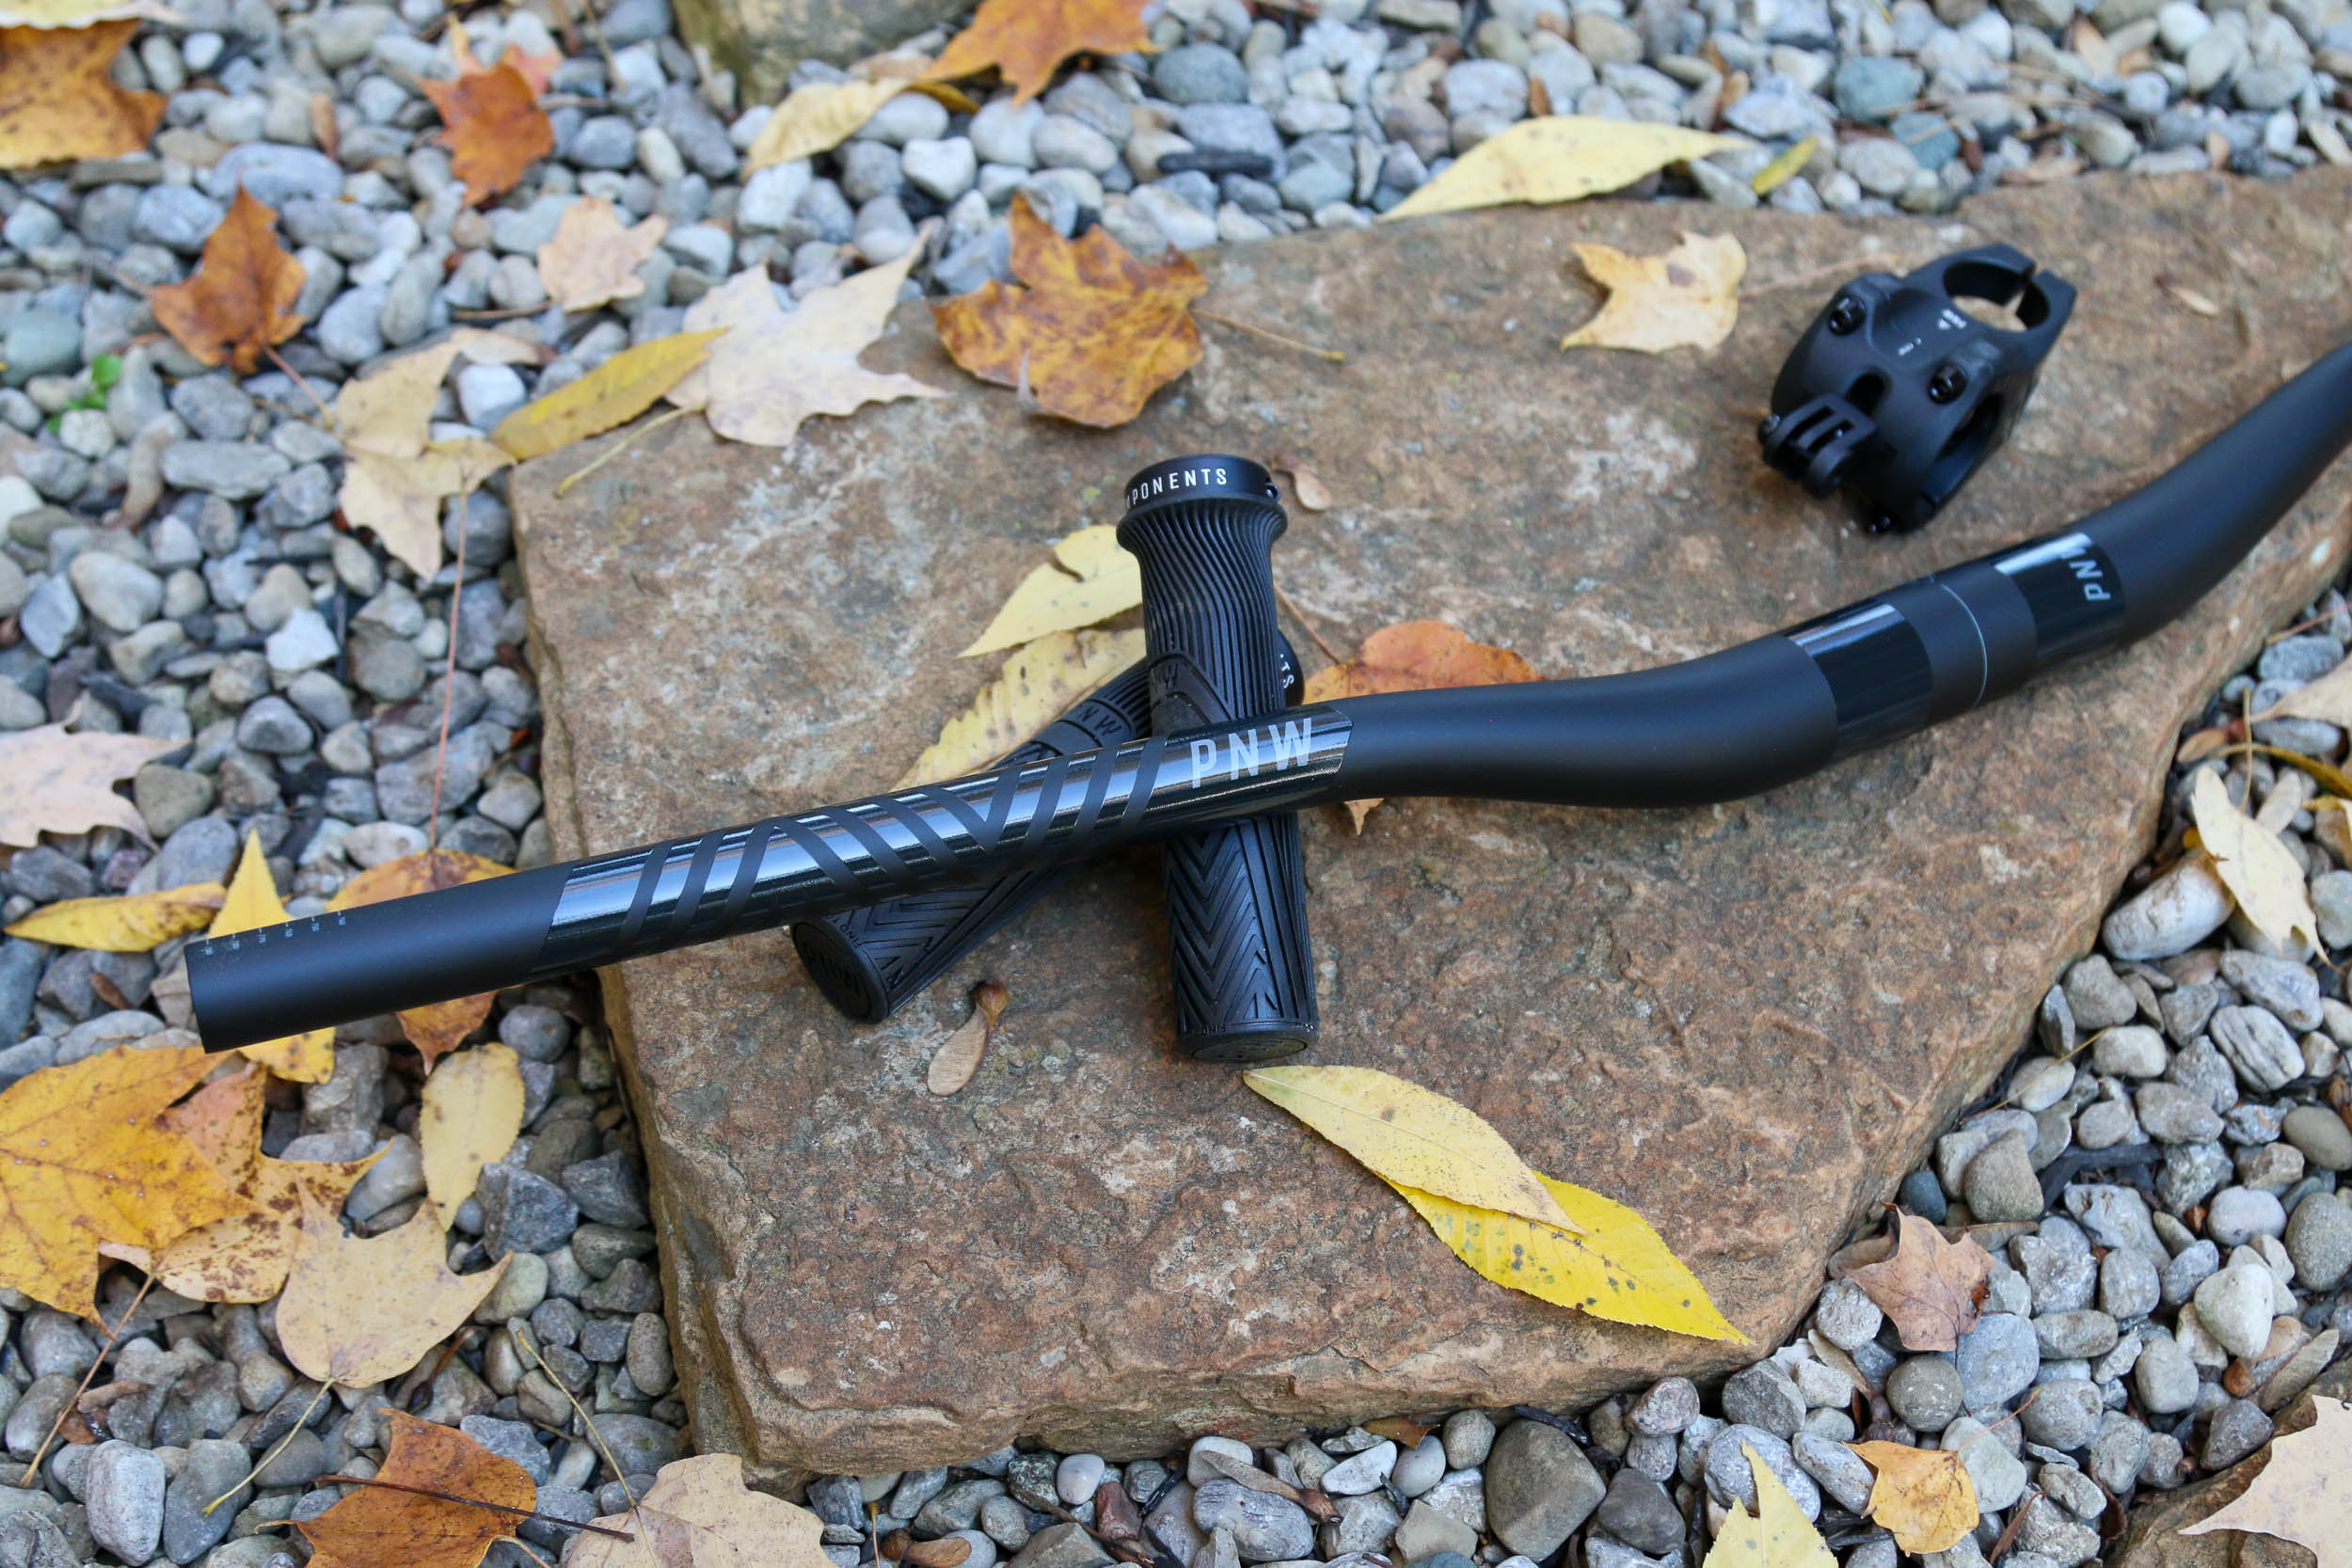 THE LOAM CARBON HANDLEBAR – PNW Components